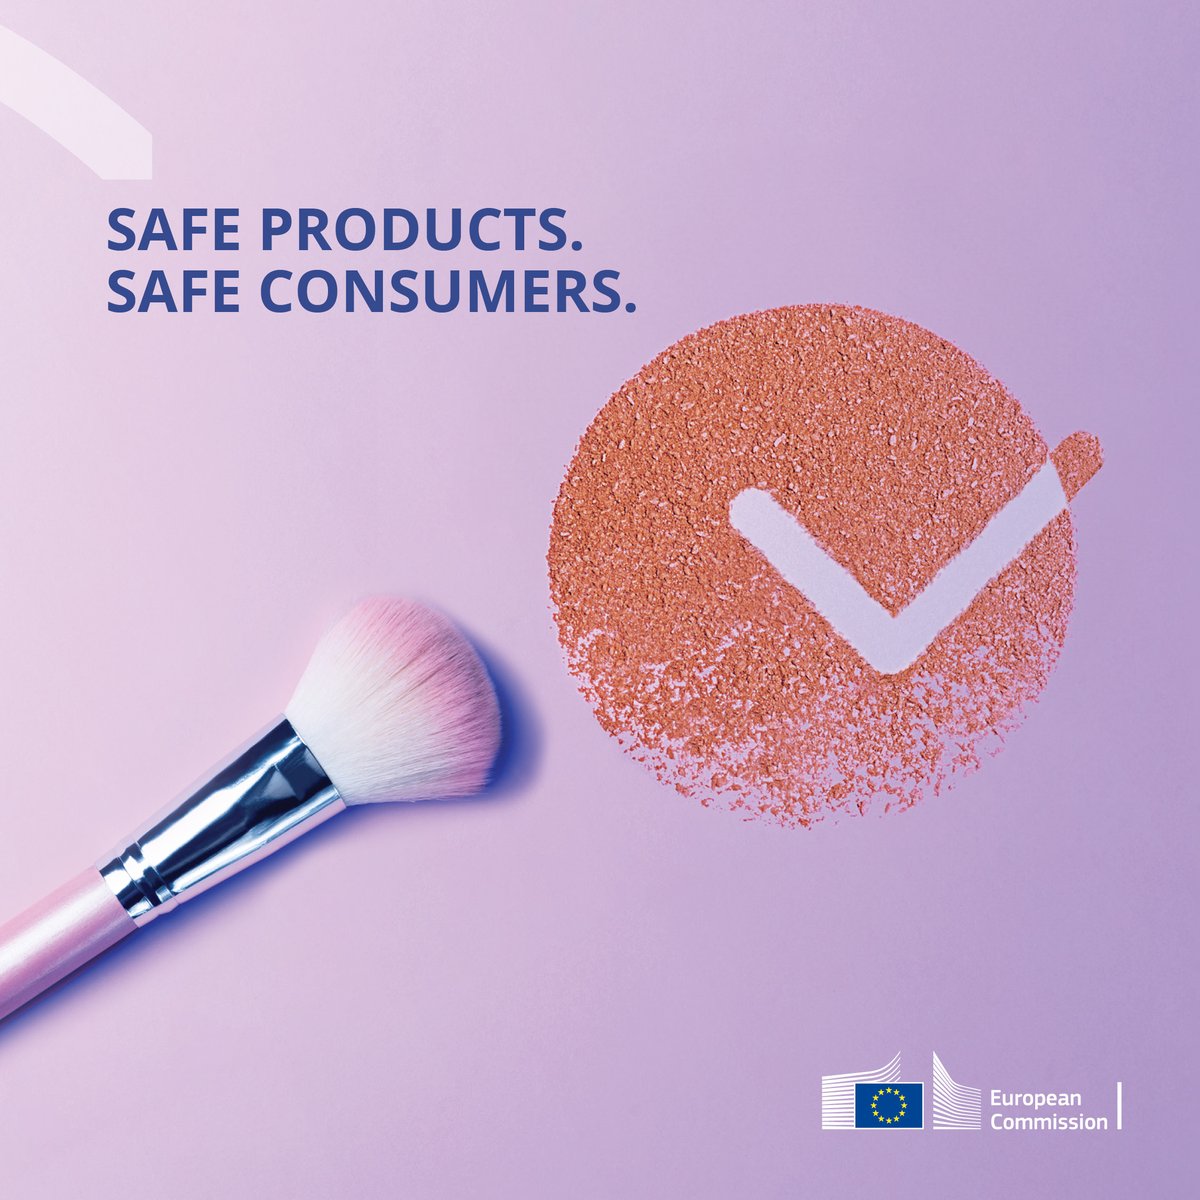 🇪🇺 Enlargement protects the lives of EU consumers. The EU Safety Gate system has helped EU countries to detect & act against dangerous products. 11k alerts have been received by the 10 countries joining in 2004. 🇨🇾 🇨🇿 🇪🇪 🇭🇺 🇱🇻 🇱🇹 🇲🇹 🇵🇱 🇸🇰 🇸🇮 #ProductSafety #20YearsTogether